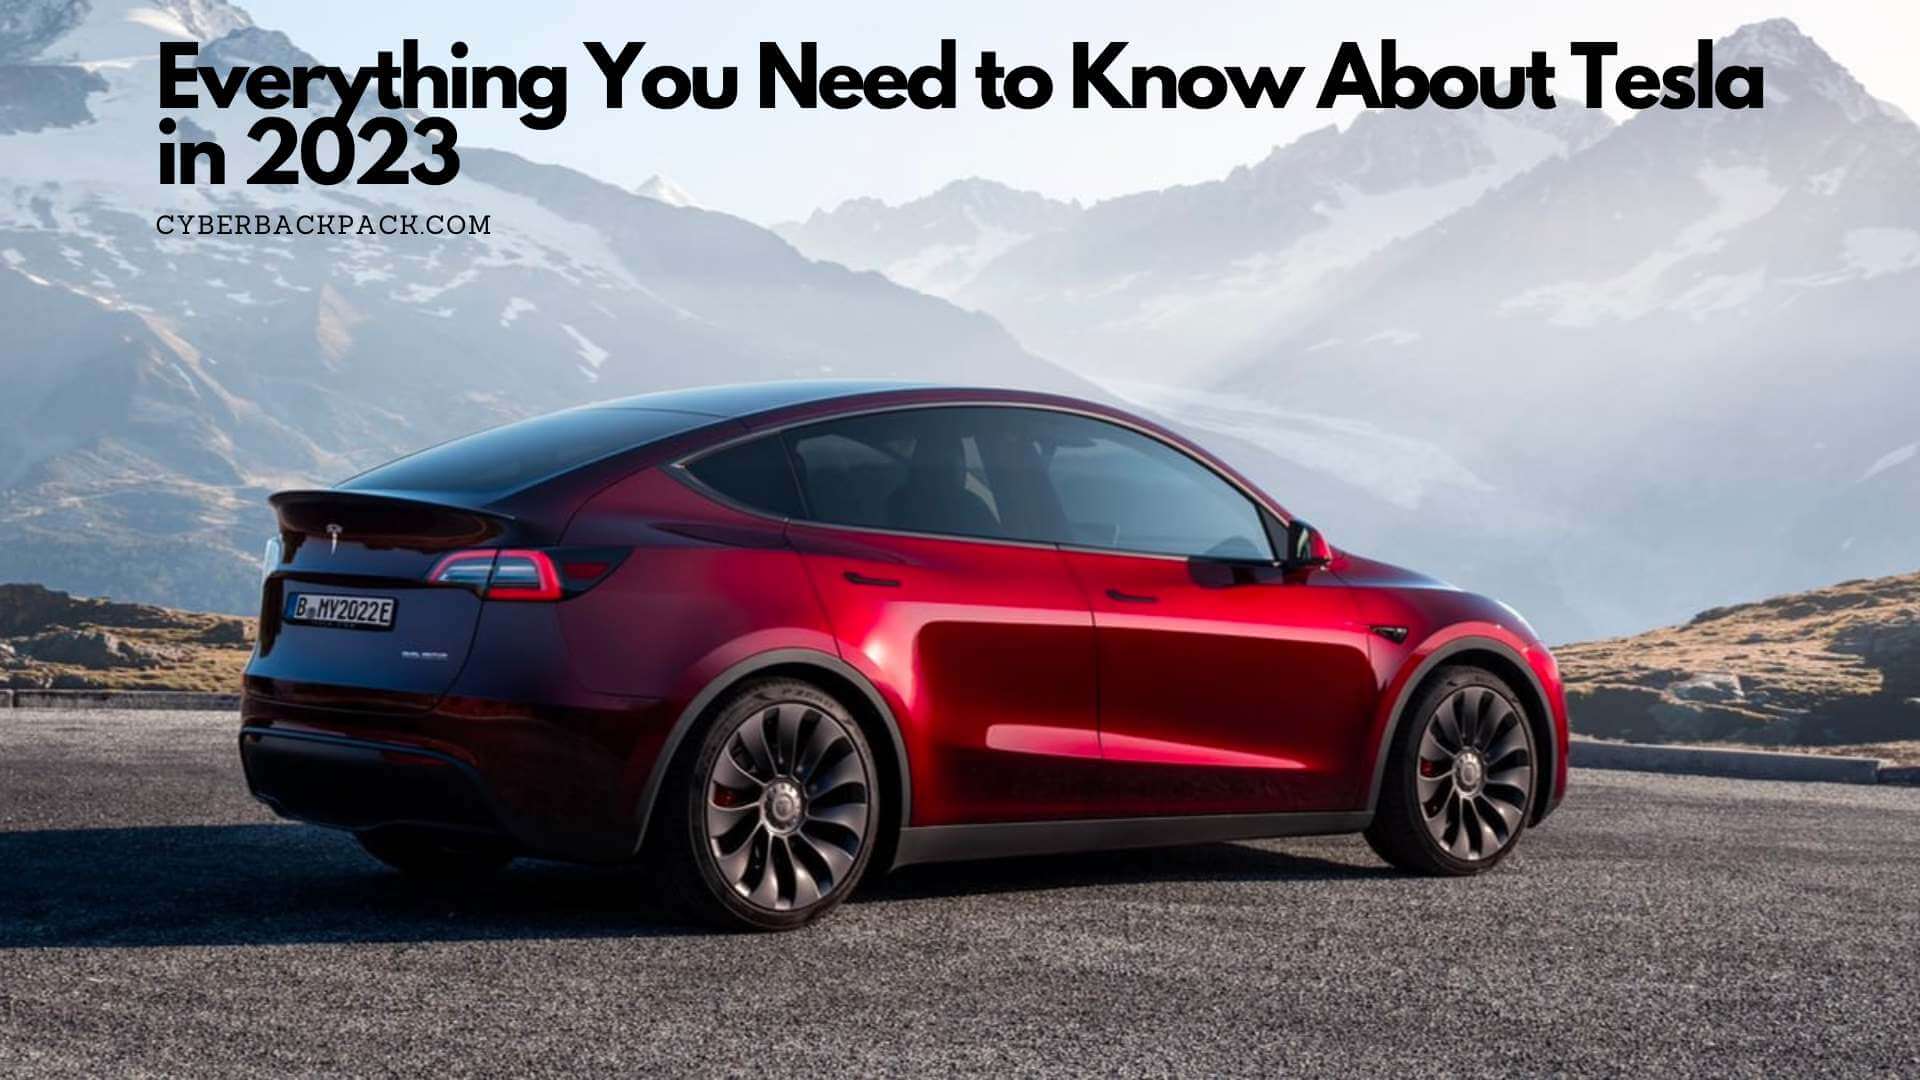 Everything You Need to Know About Tesla in 2023